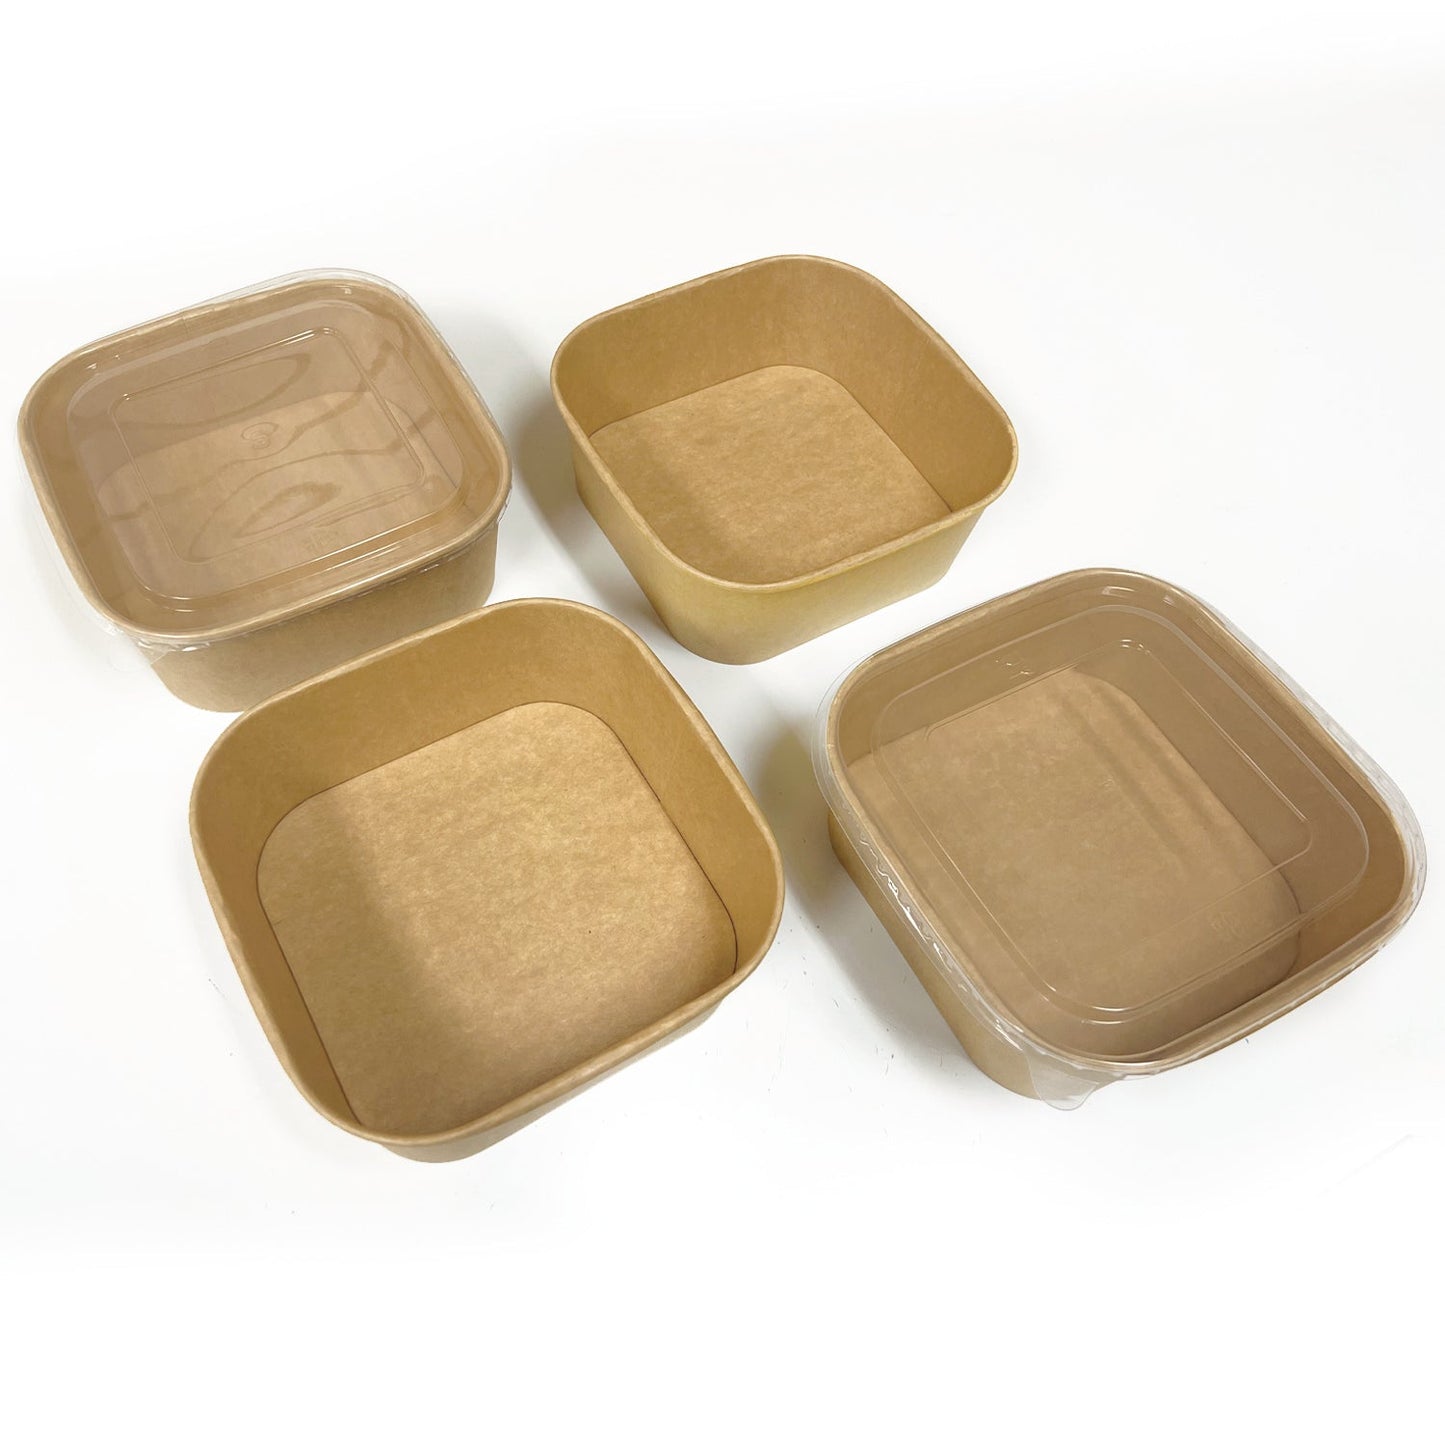 KIS-FC1000S | 34oz, 1000ml Kraft Paper Square Containers Base; From $0.26/pc